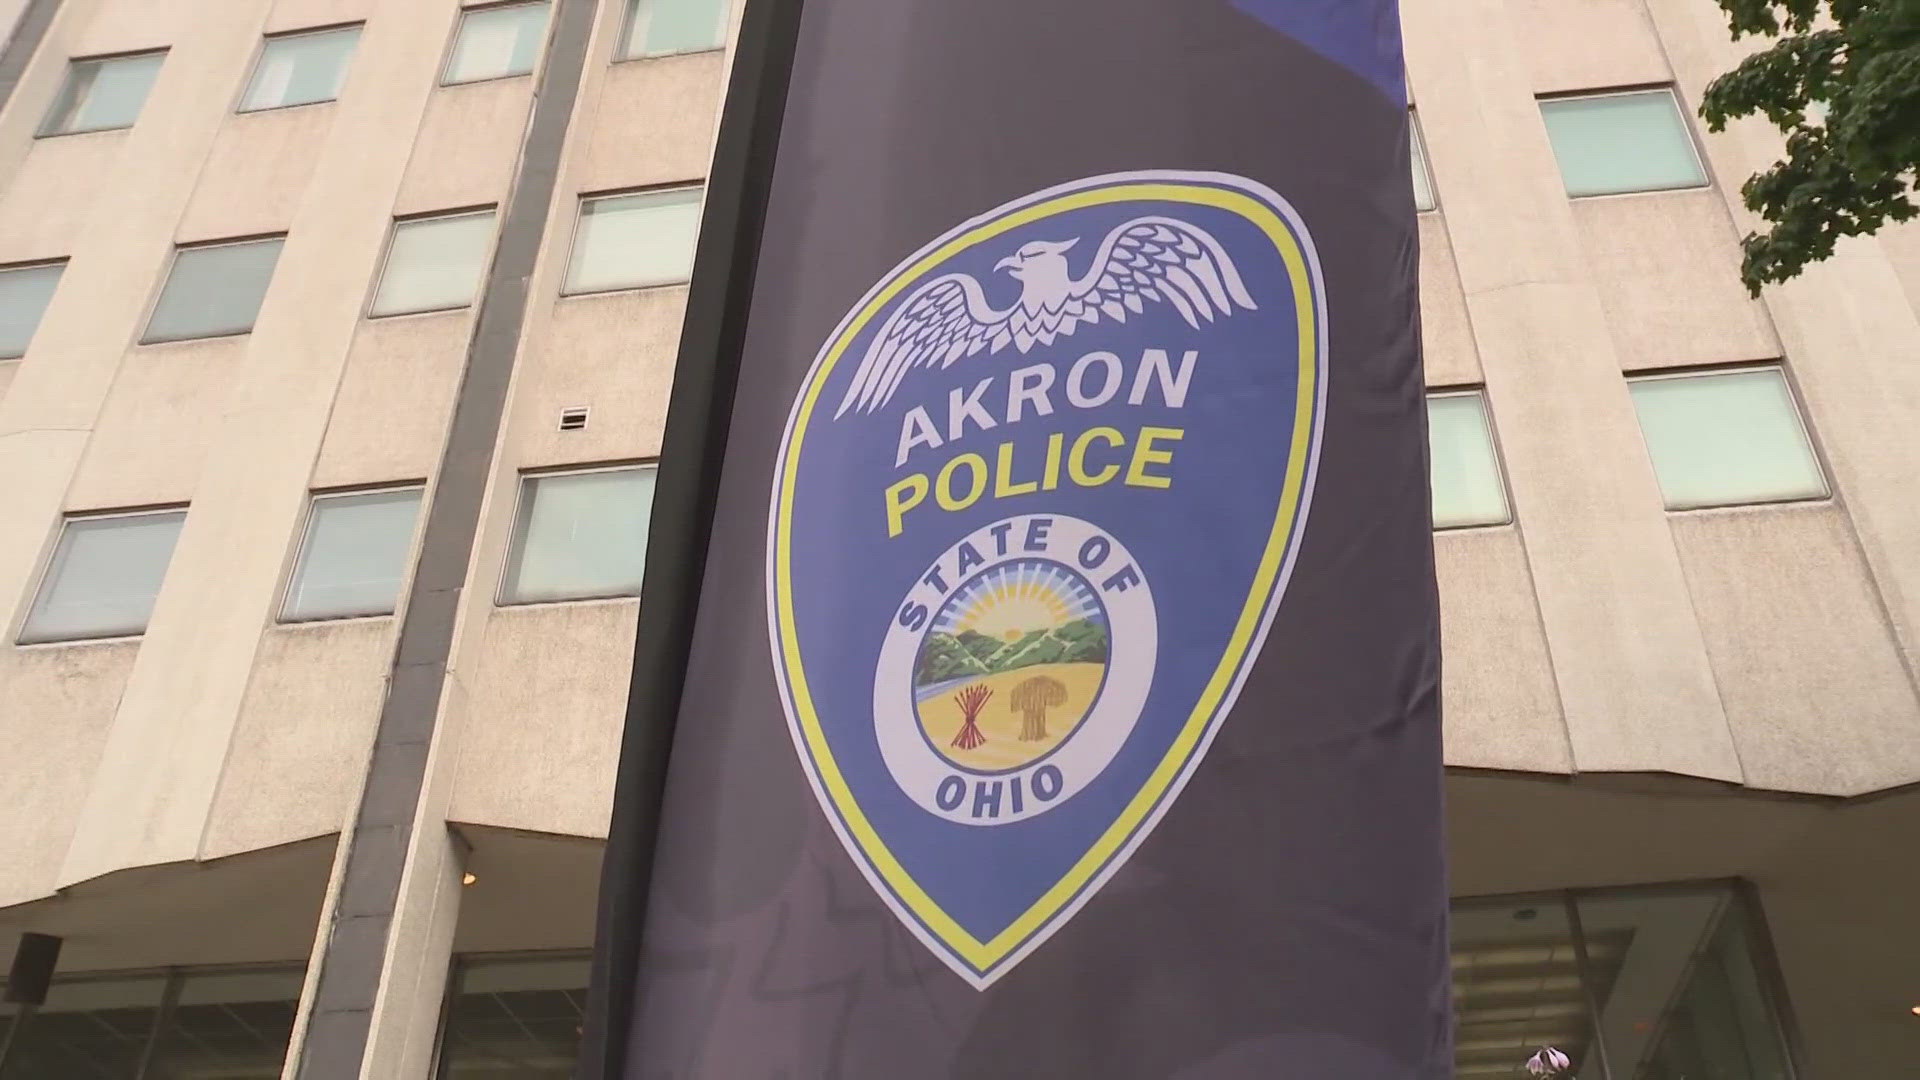 Akron police were notified that two victims -- ages 28 and 29 -- were dropped off at a local hospital with gunshot wounds.